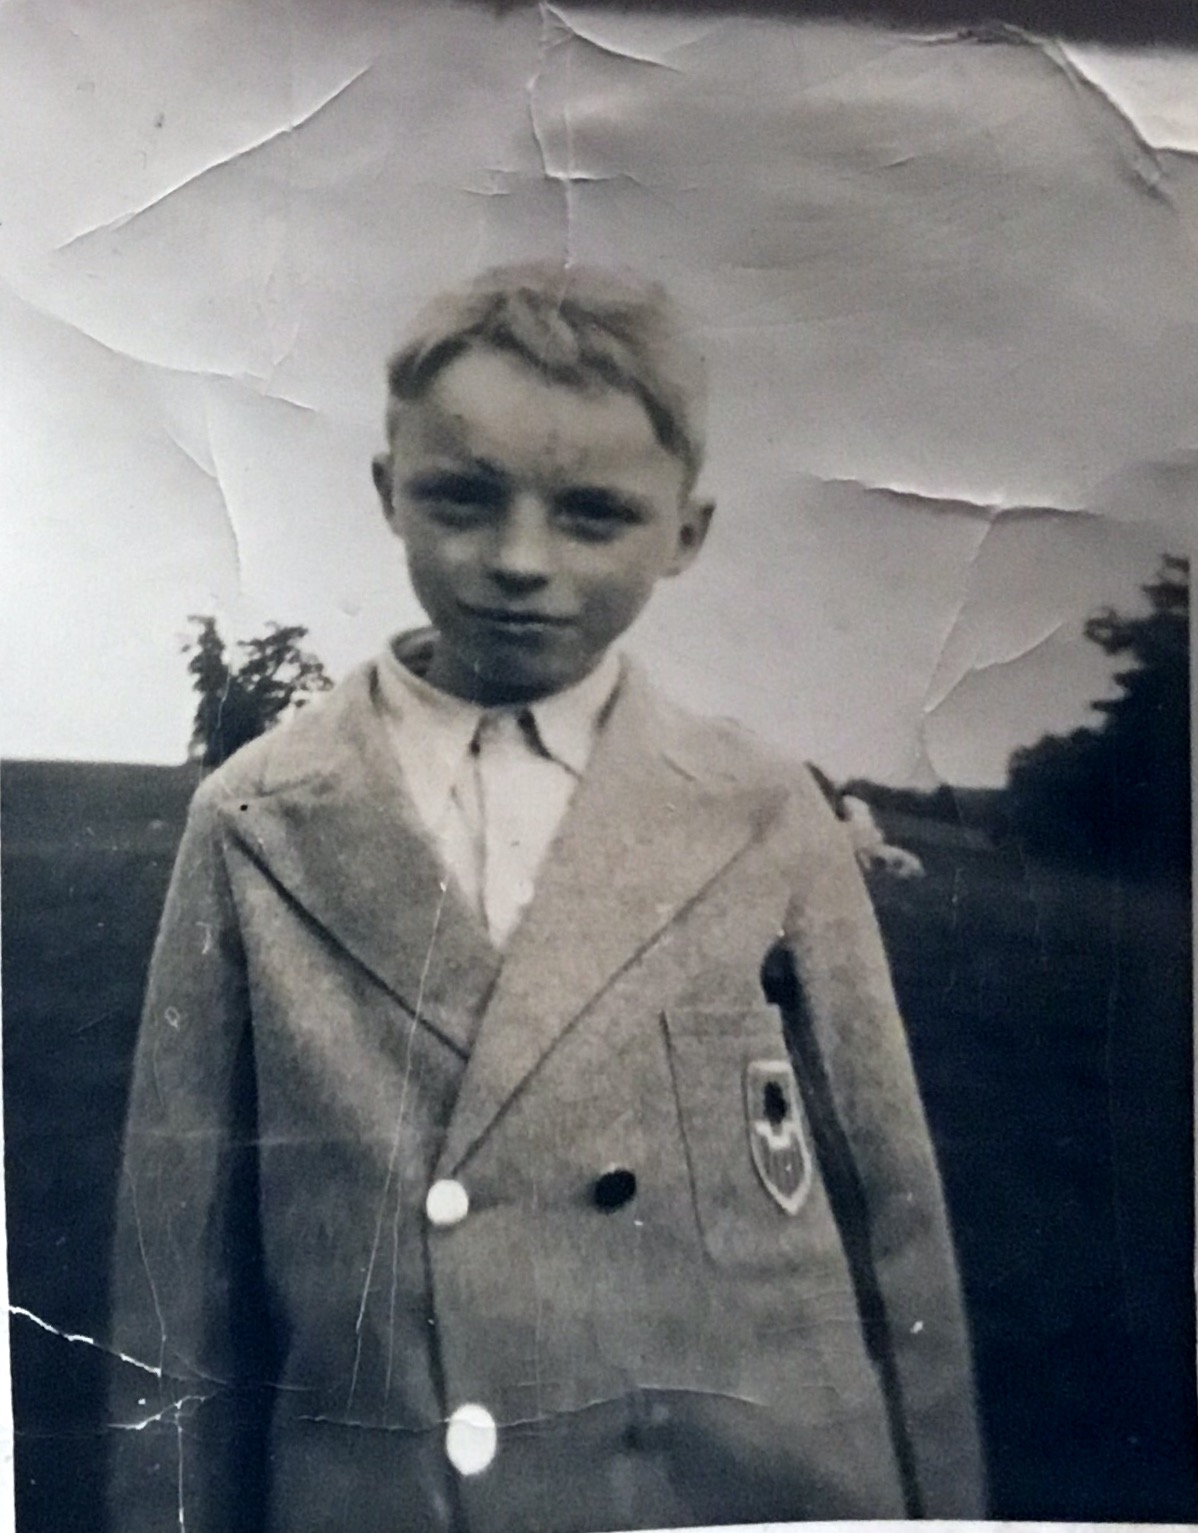 As a child, possibly in school blazer, which looks to be far too big for him.  It has odd buttons too.  Possibly around 1940